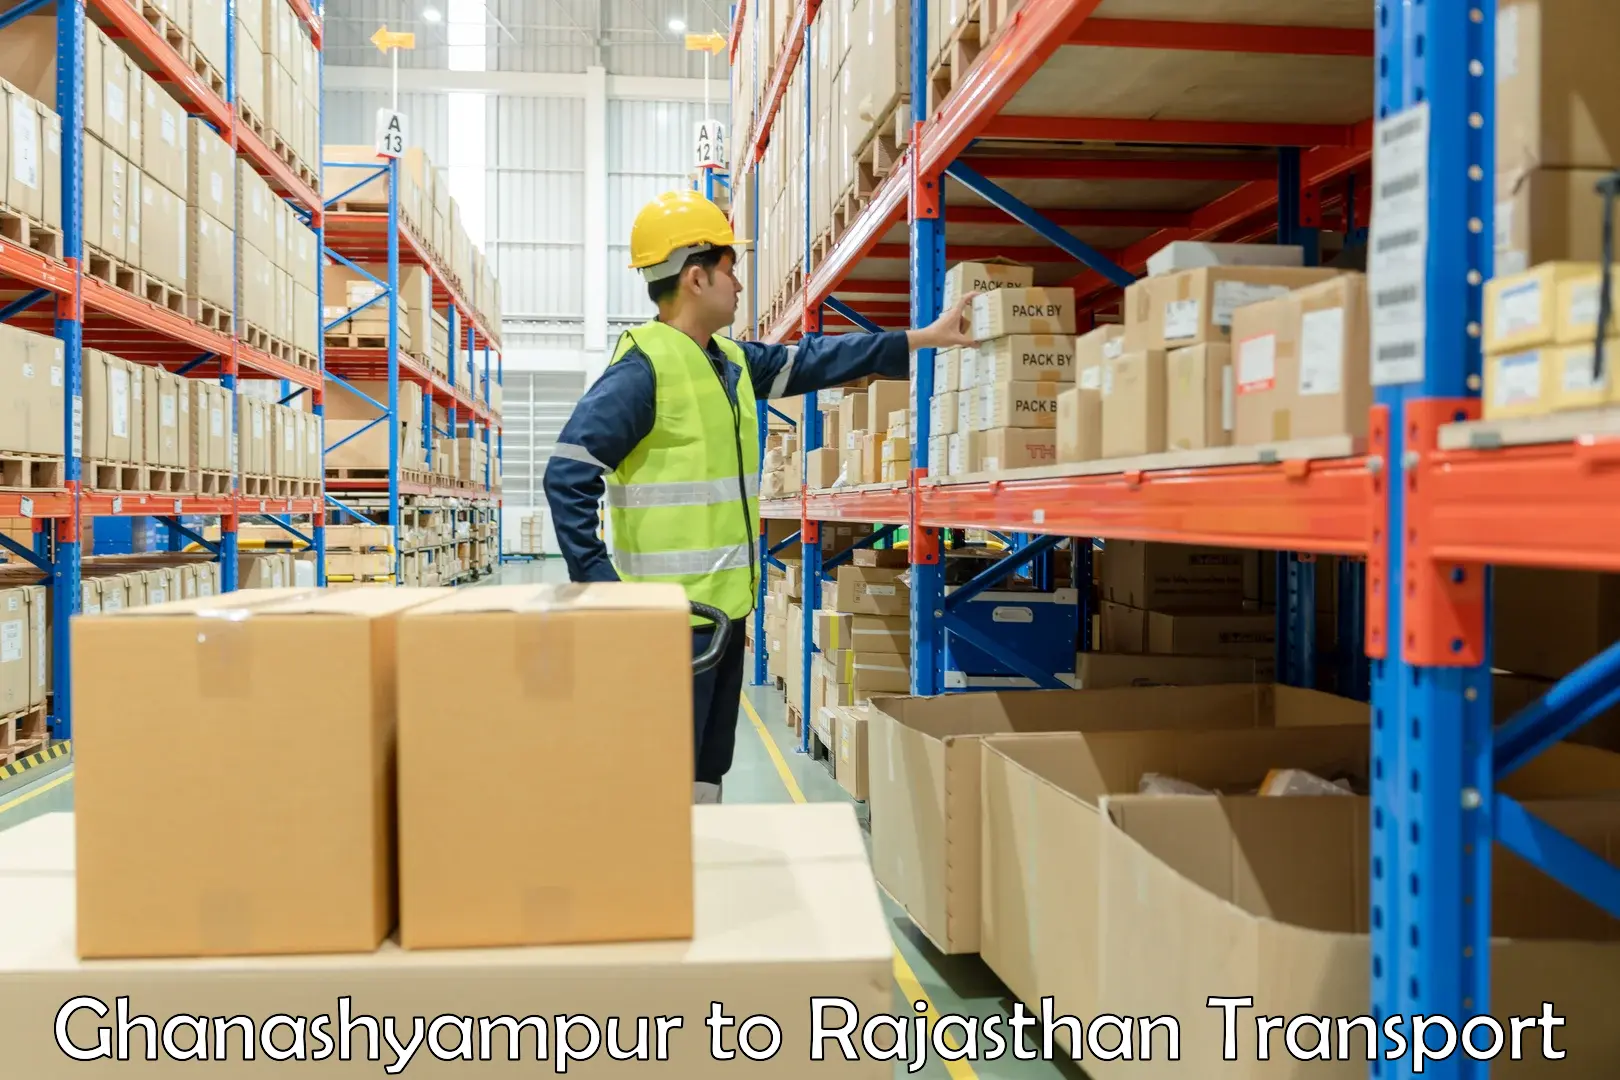 Part load transport service in India Ghanashyampur to Shrimadhopur